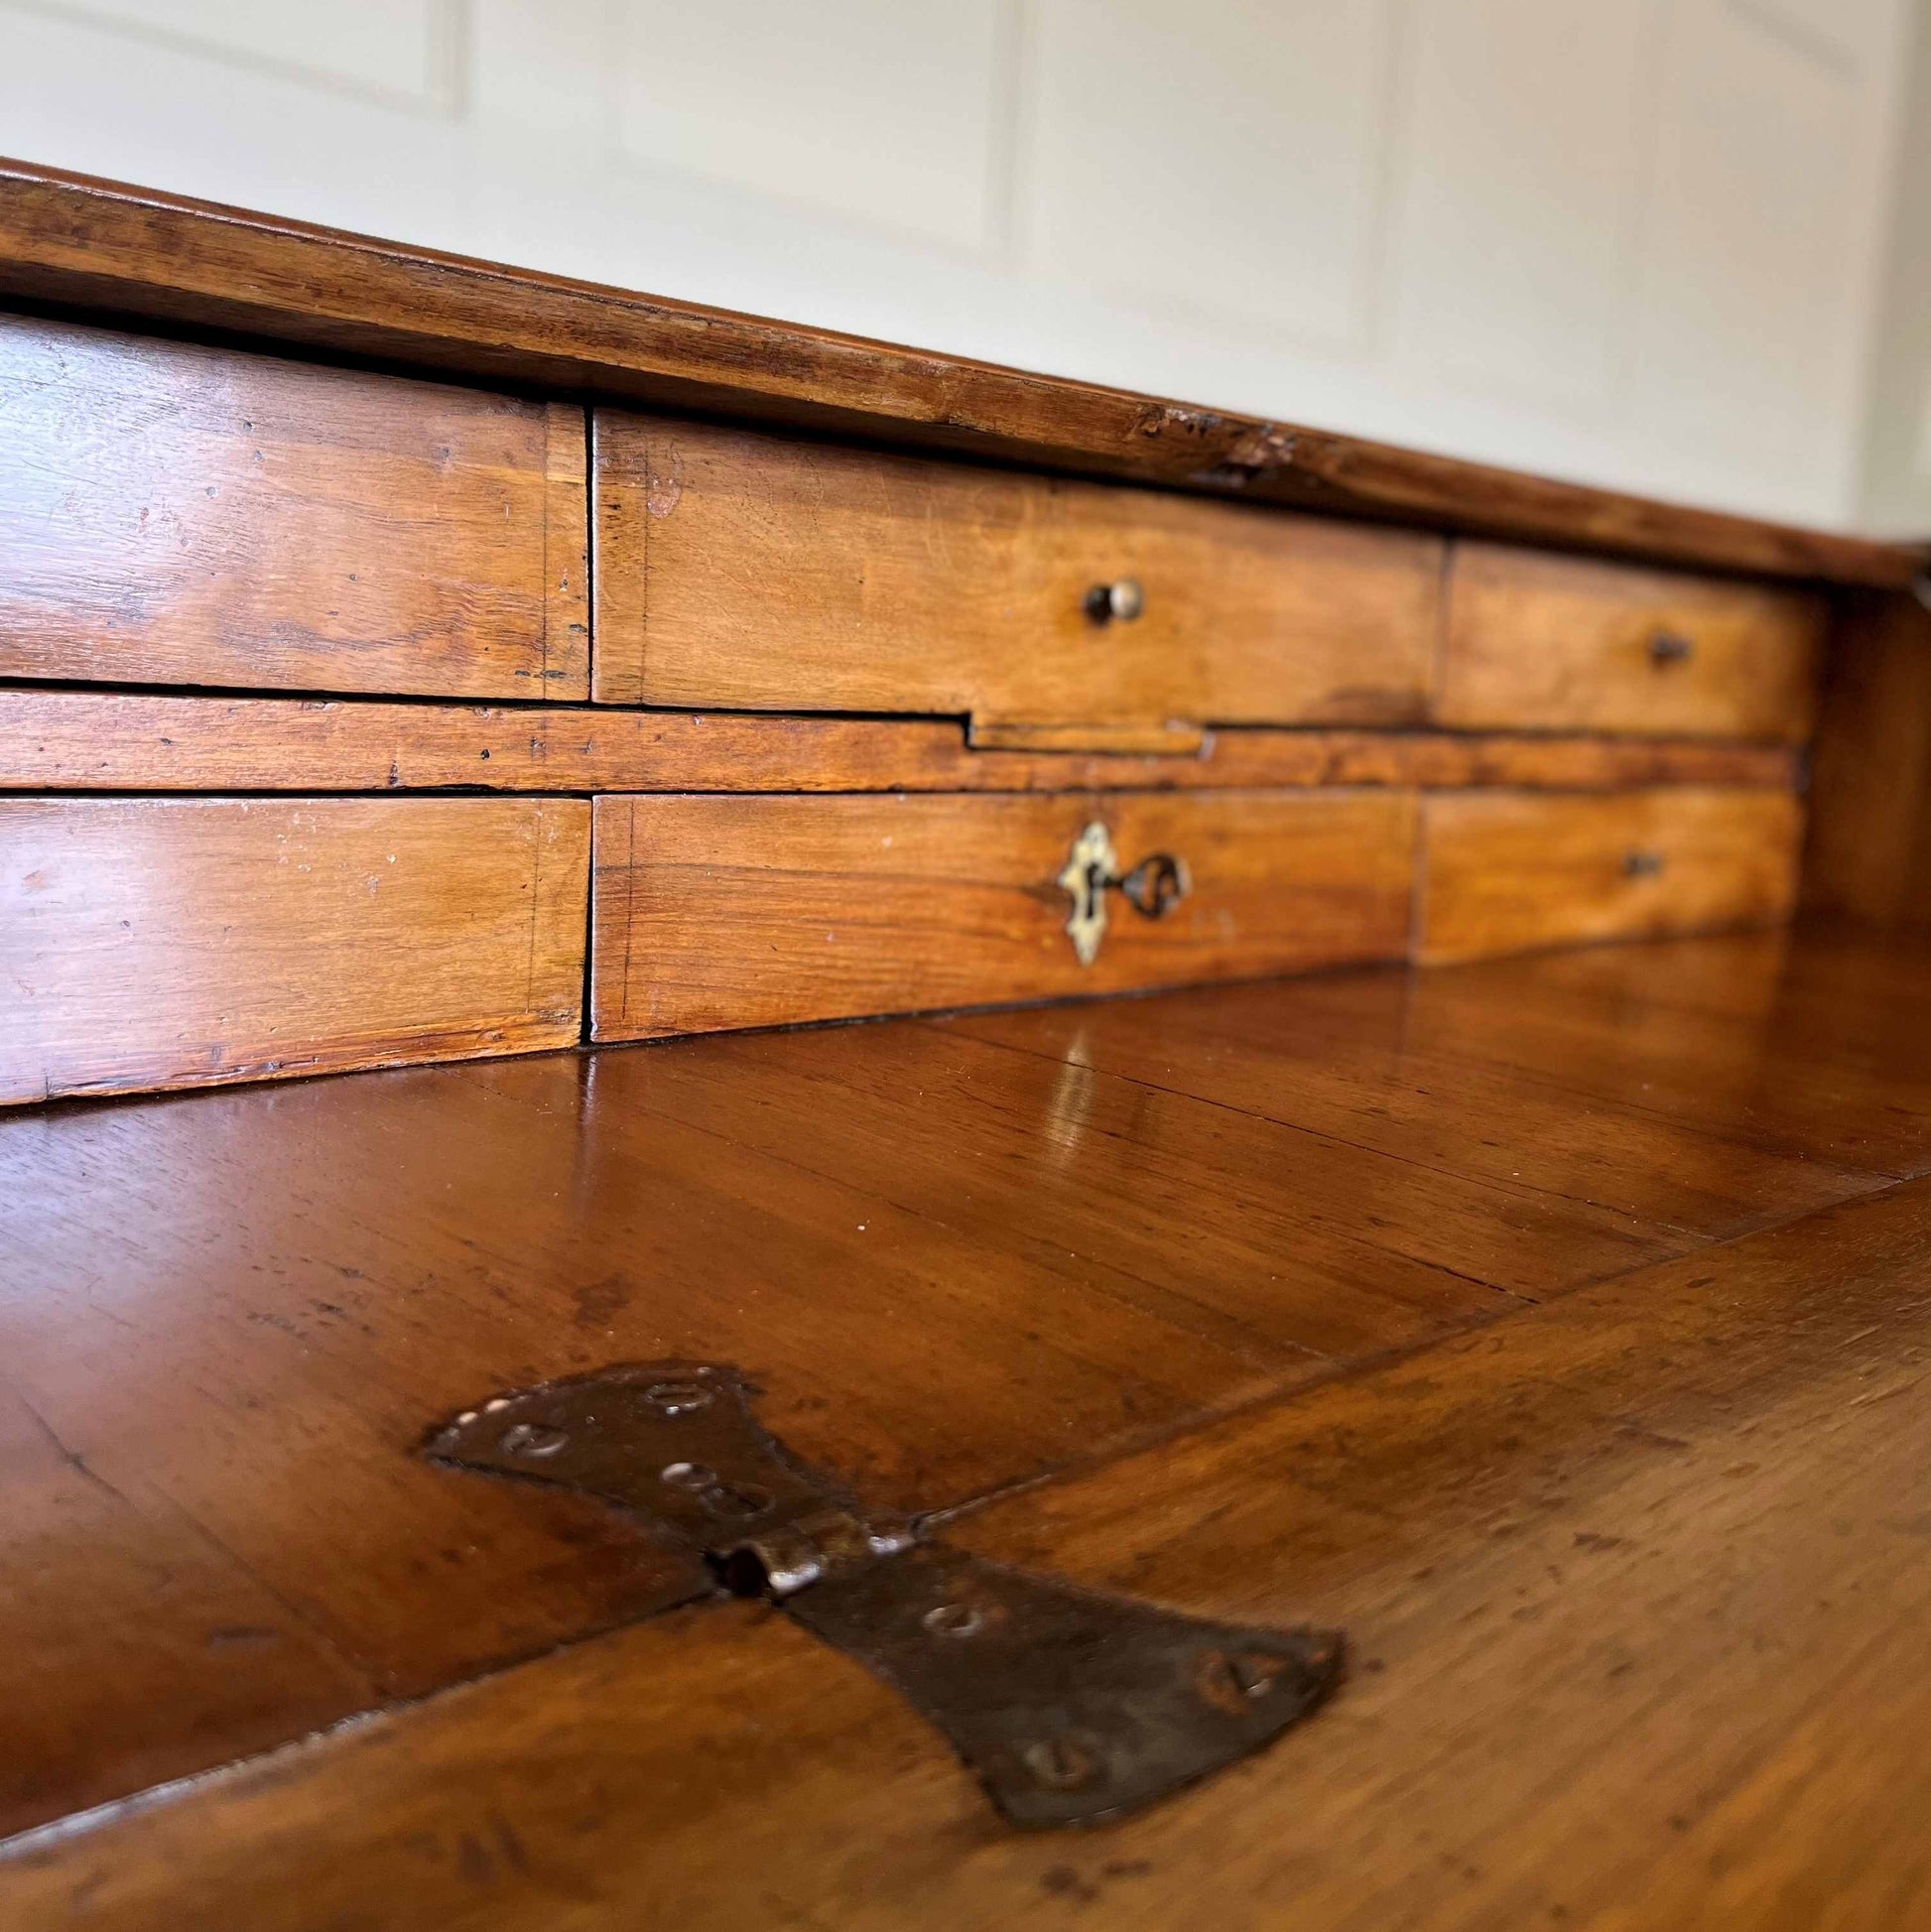 An 18th century Italian bureau with beautiful inlay detailing and a fall front that opens to form a writing surface with fitted interior, consisting of six drawers. Four long drawers within the main body of the bureau, each with decorative brass backplates and drop handles, over shaped bracket feet. With a key for all drawers, lock mechanisms working smoothly. In very good, fully restored condition.